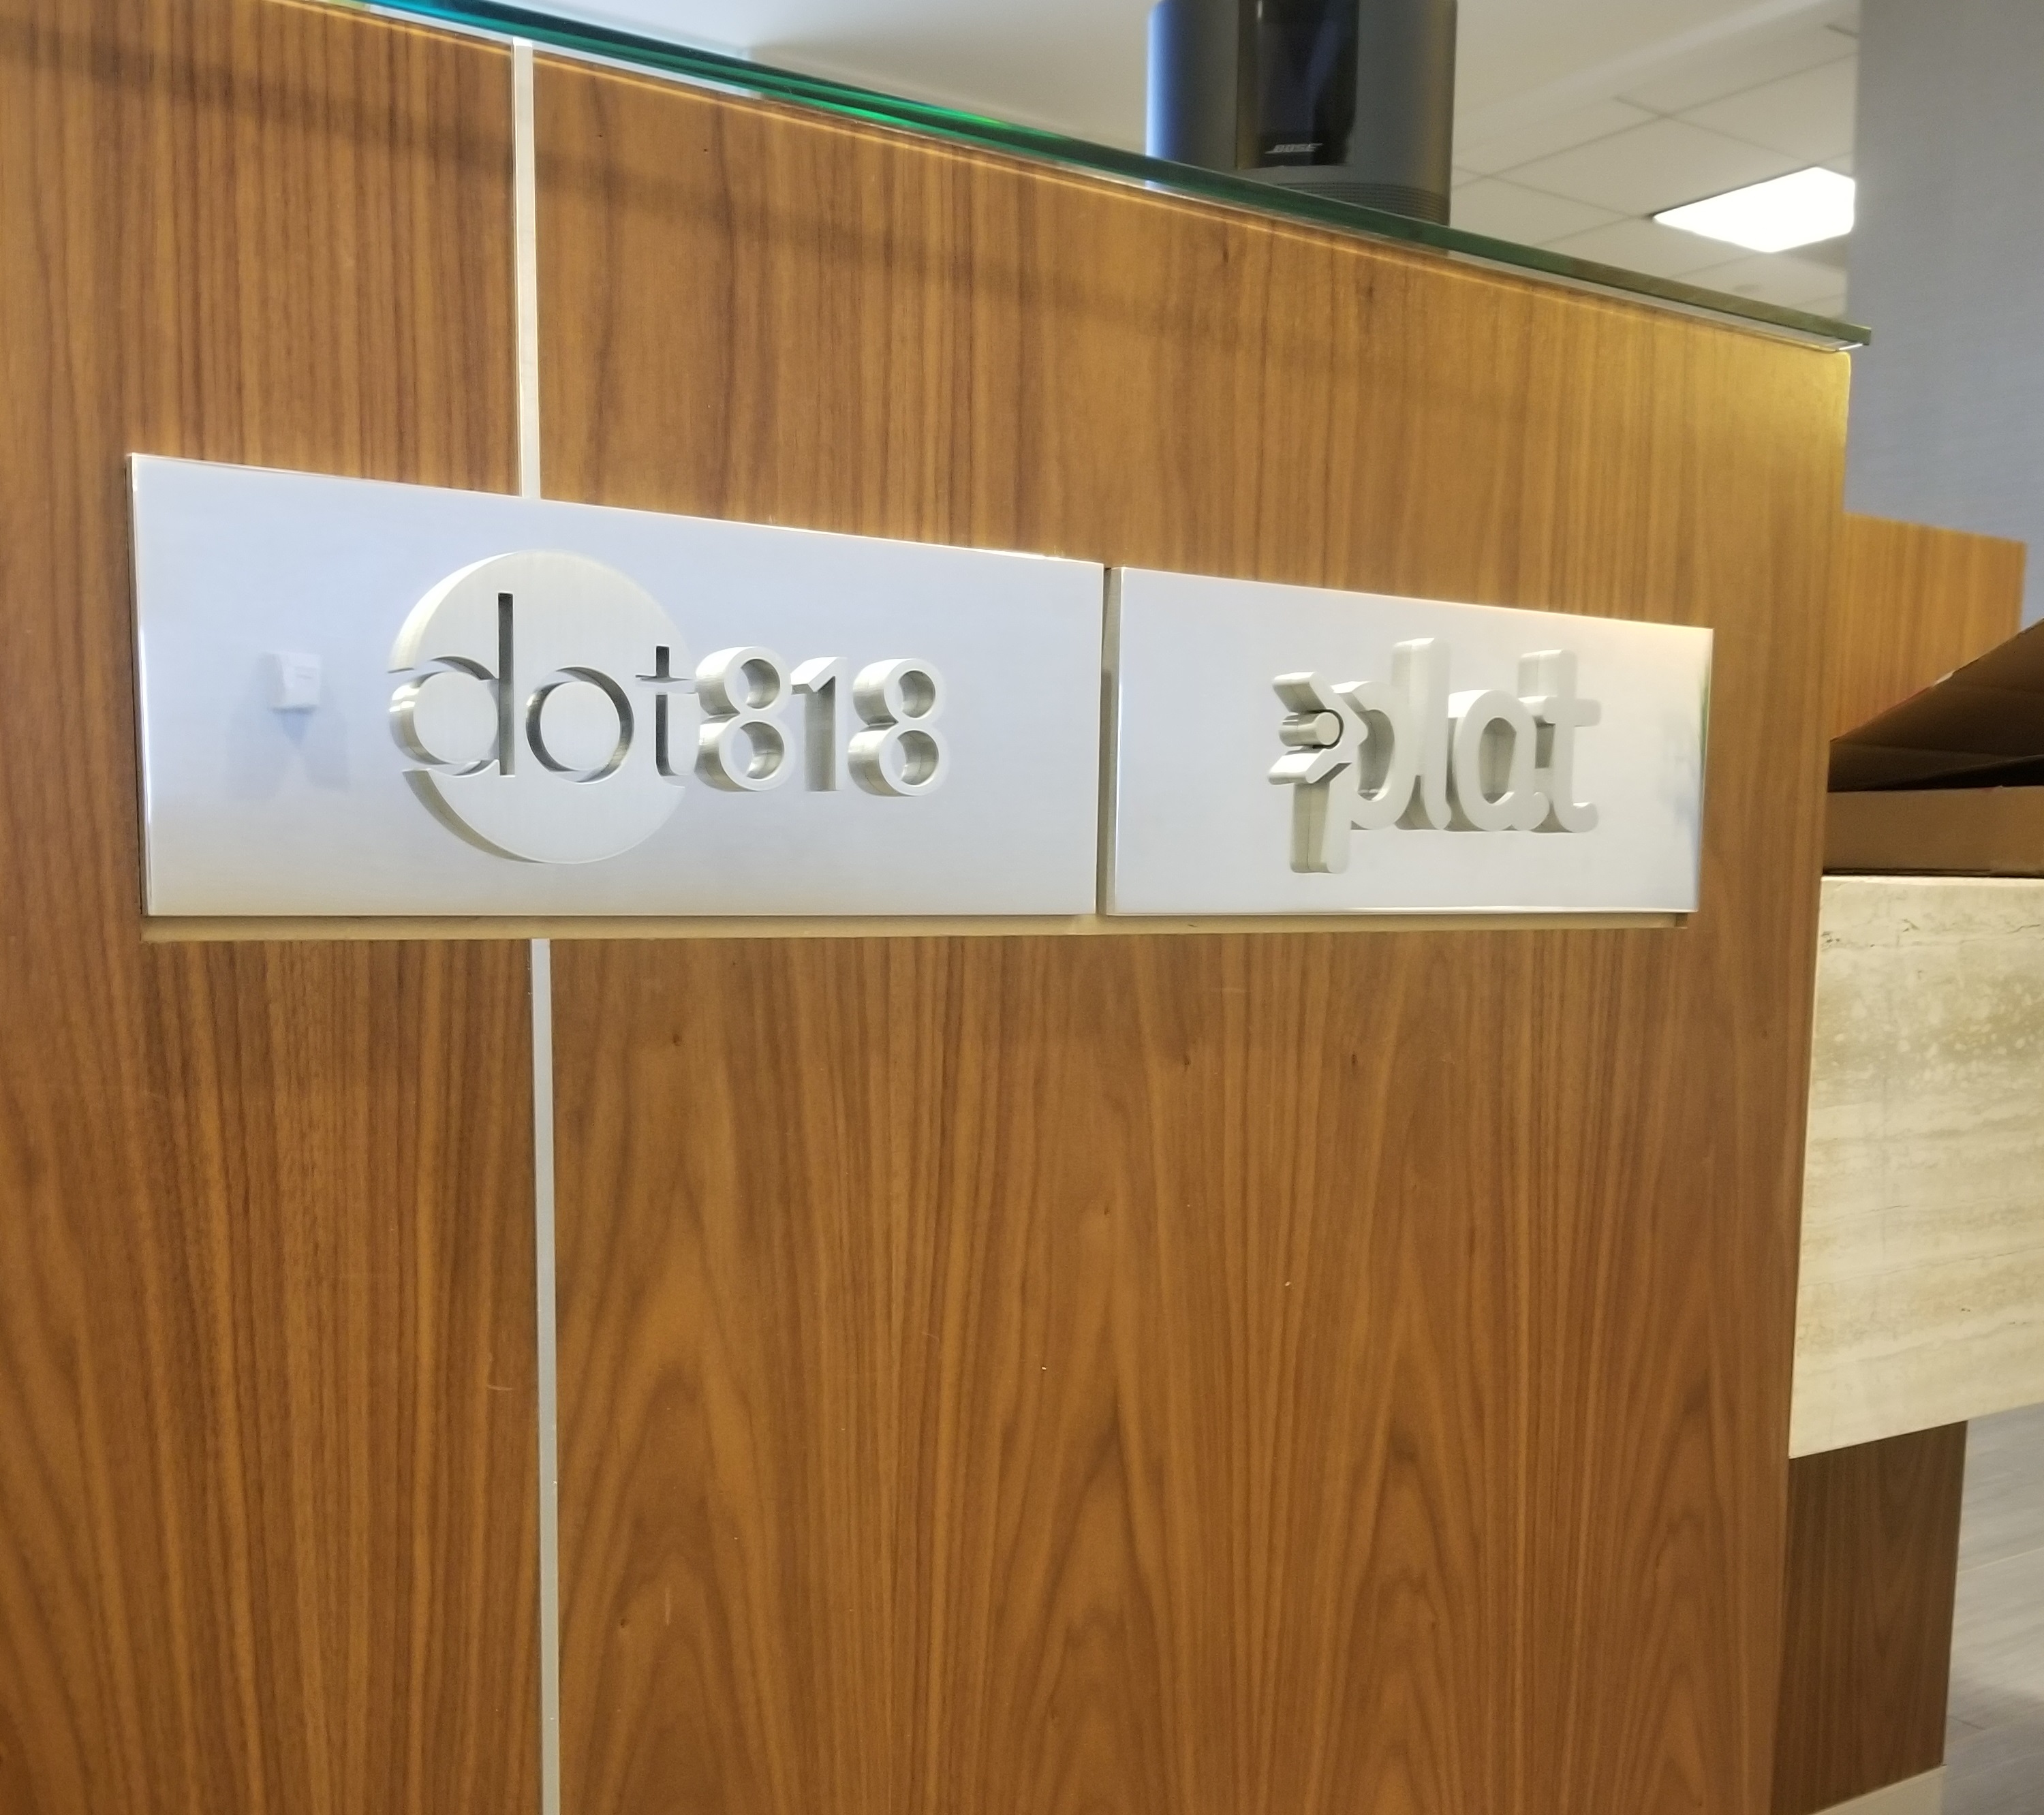 You are currently viewing Metal Office Lobby Sign for Dot818 in Glendale